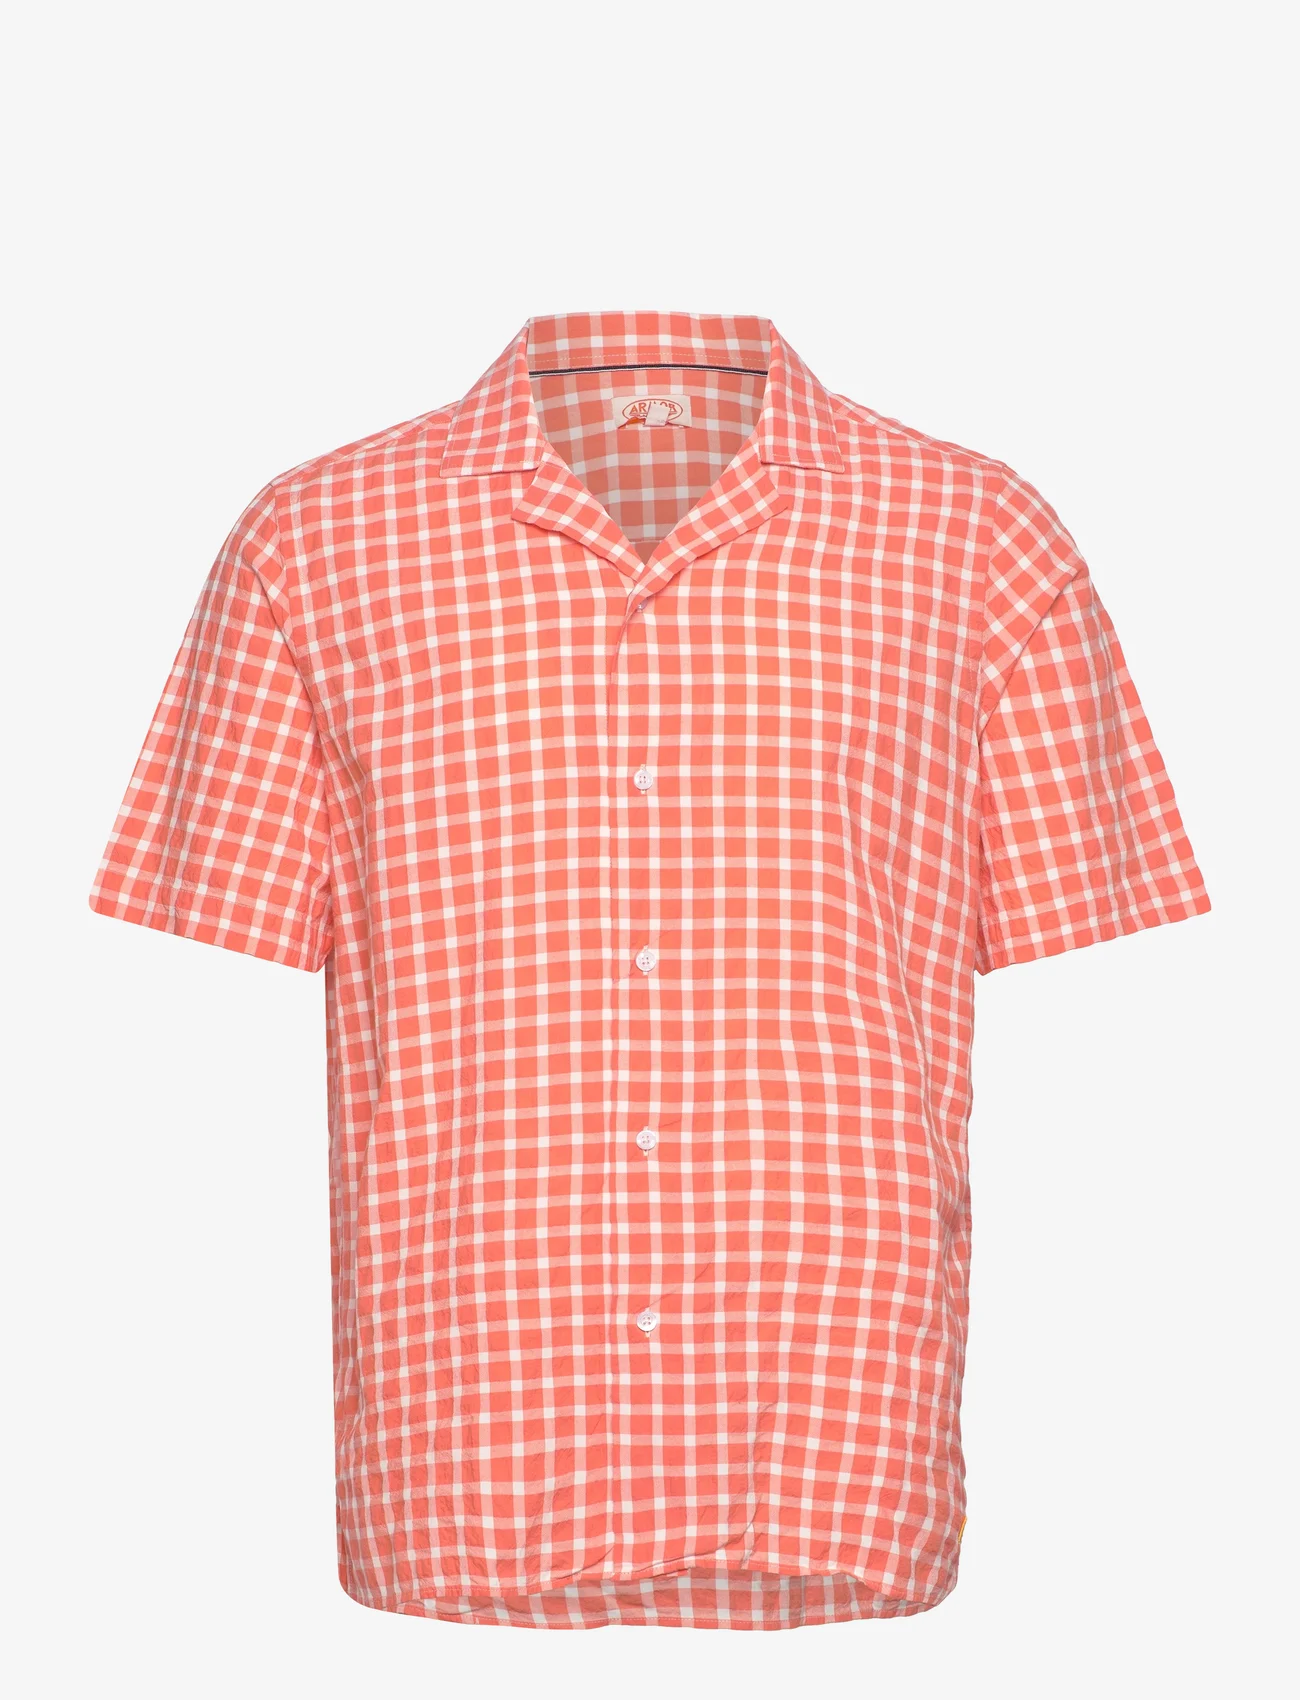 Armor Lux - Checked short-sleeved shirt - checkered shirts - carreaux coral - 0